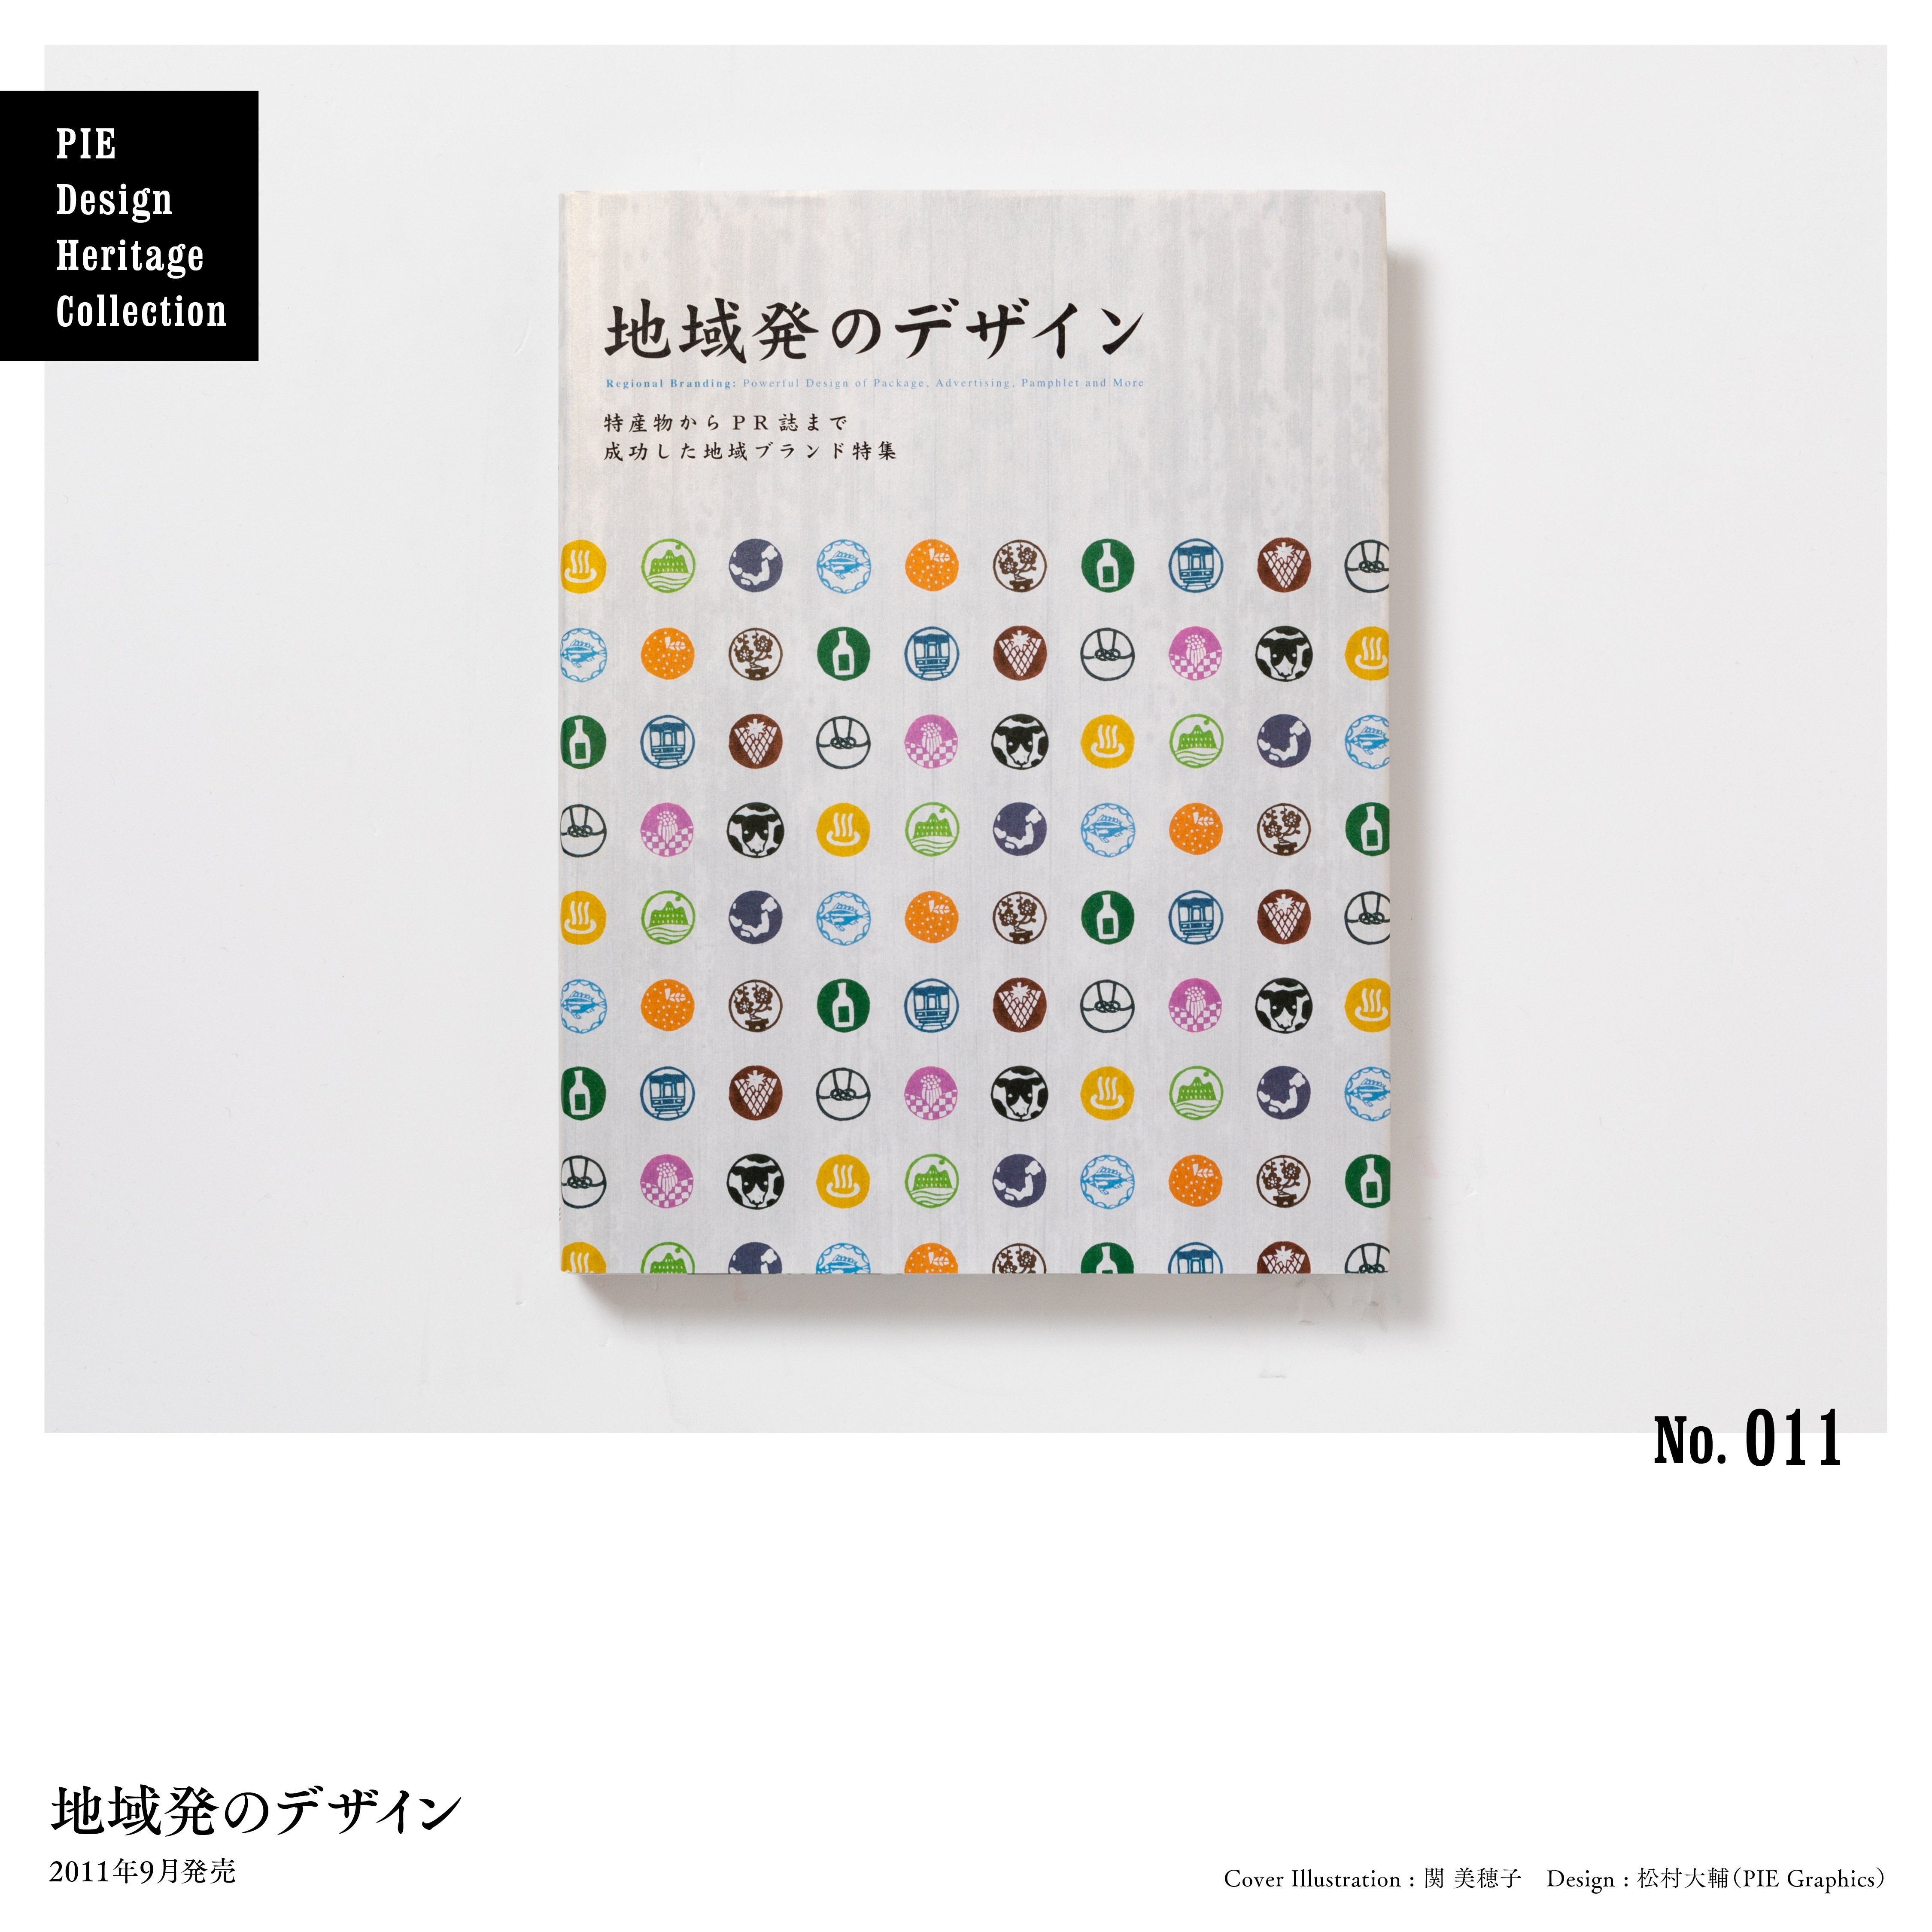 red dot design year book 2011/2012デザイン本